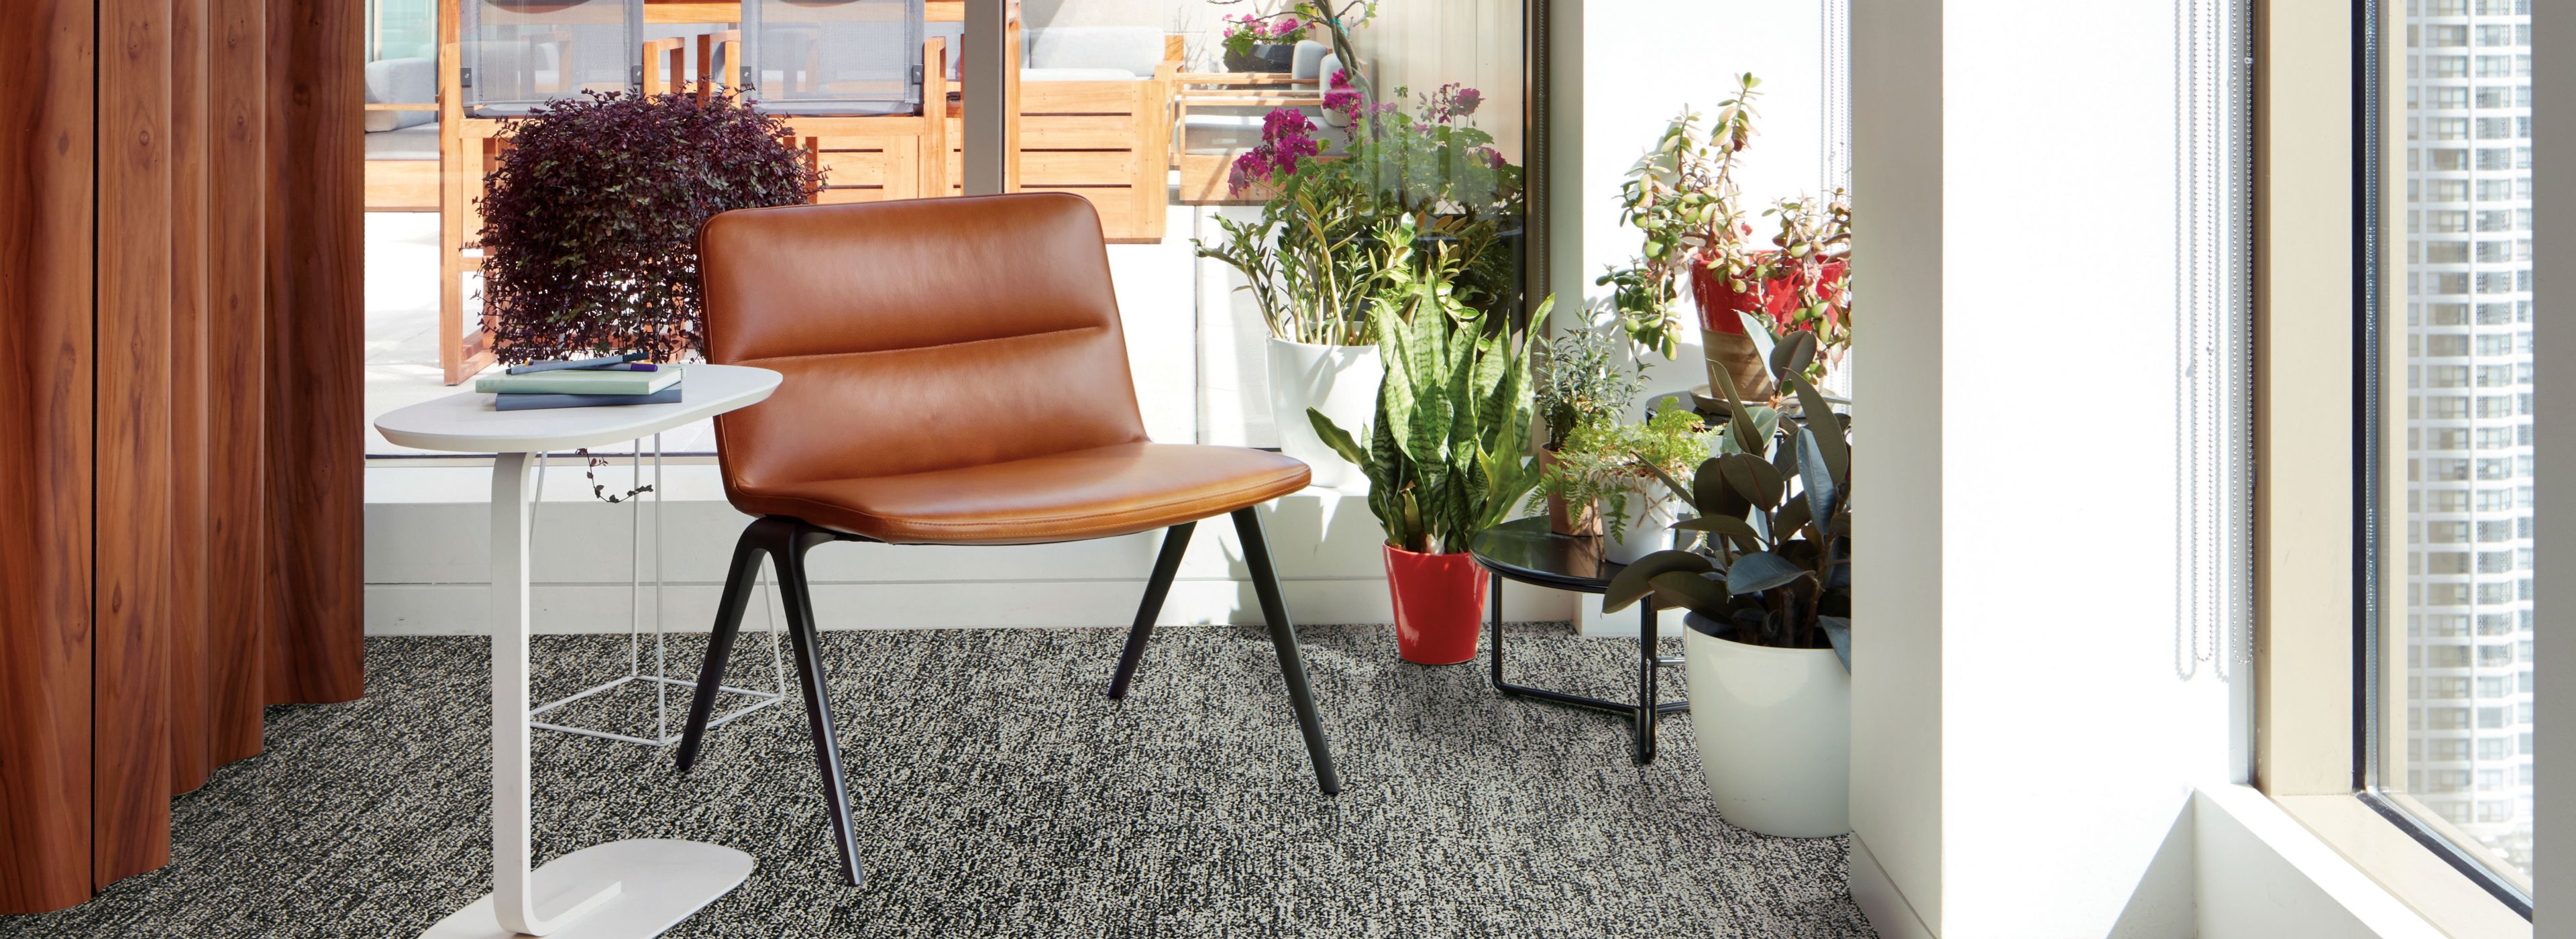 Interface Obligato plank carpet tile with leather chair and potted plants in windows image number 1